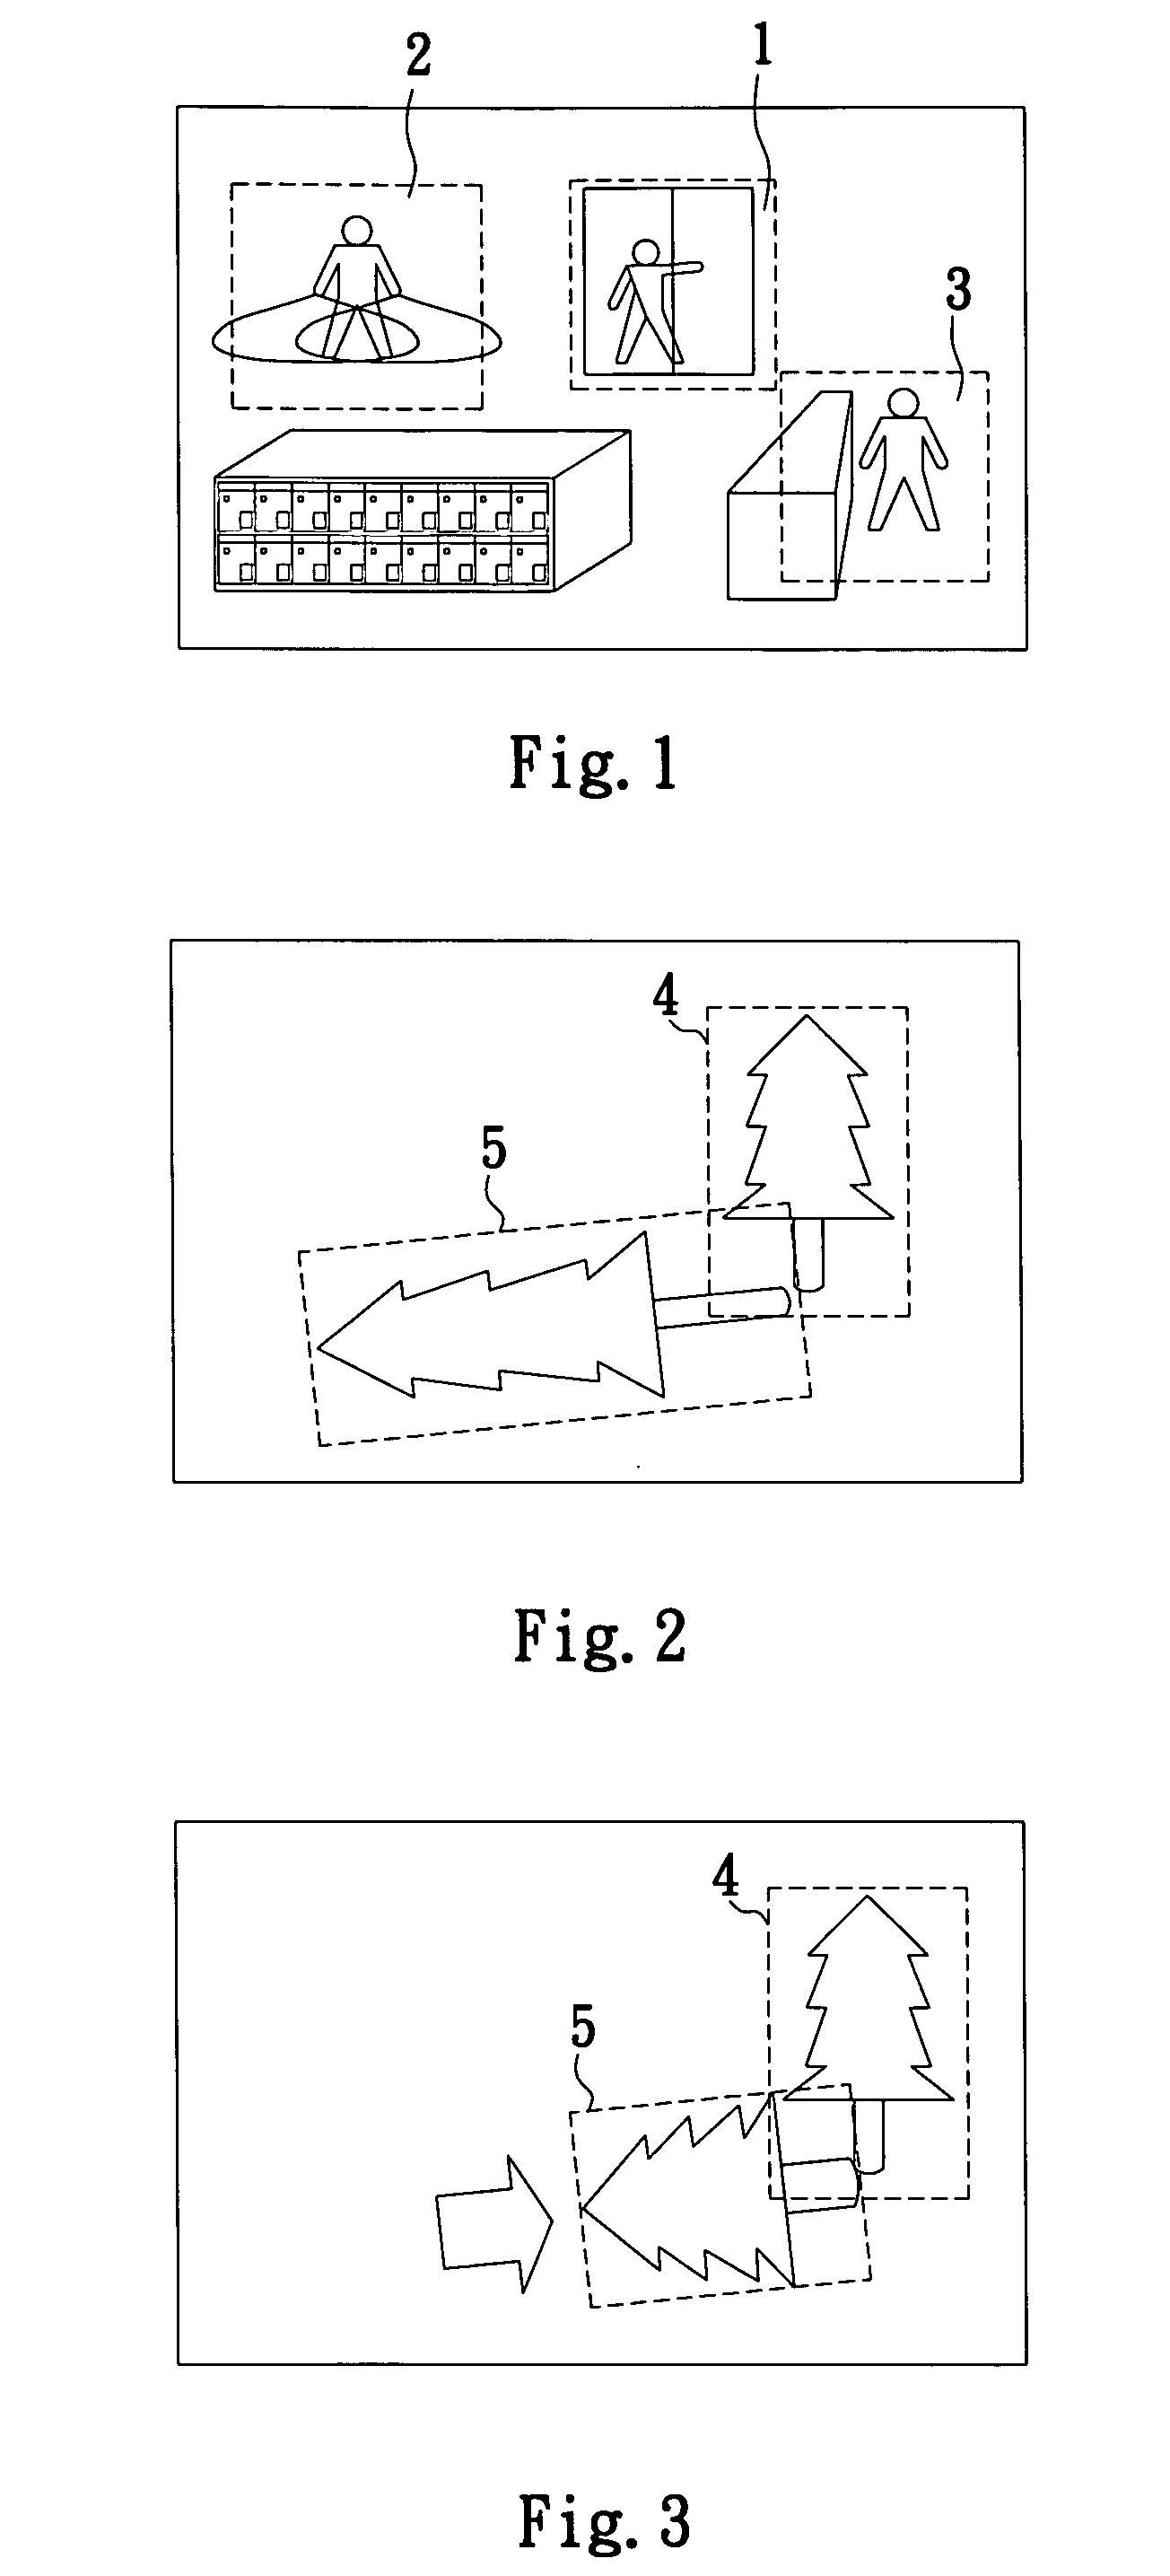 Object detection system and method